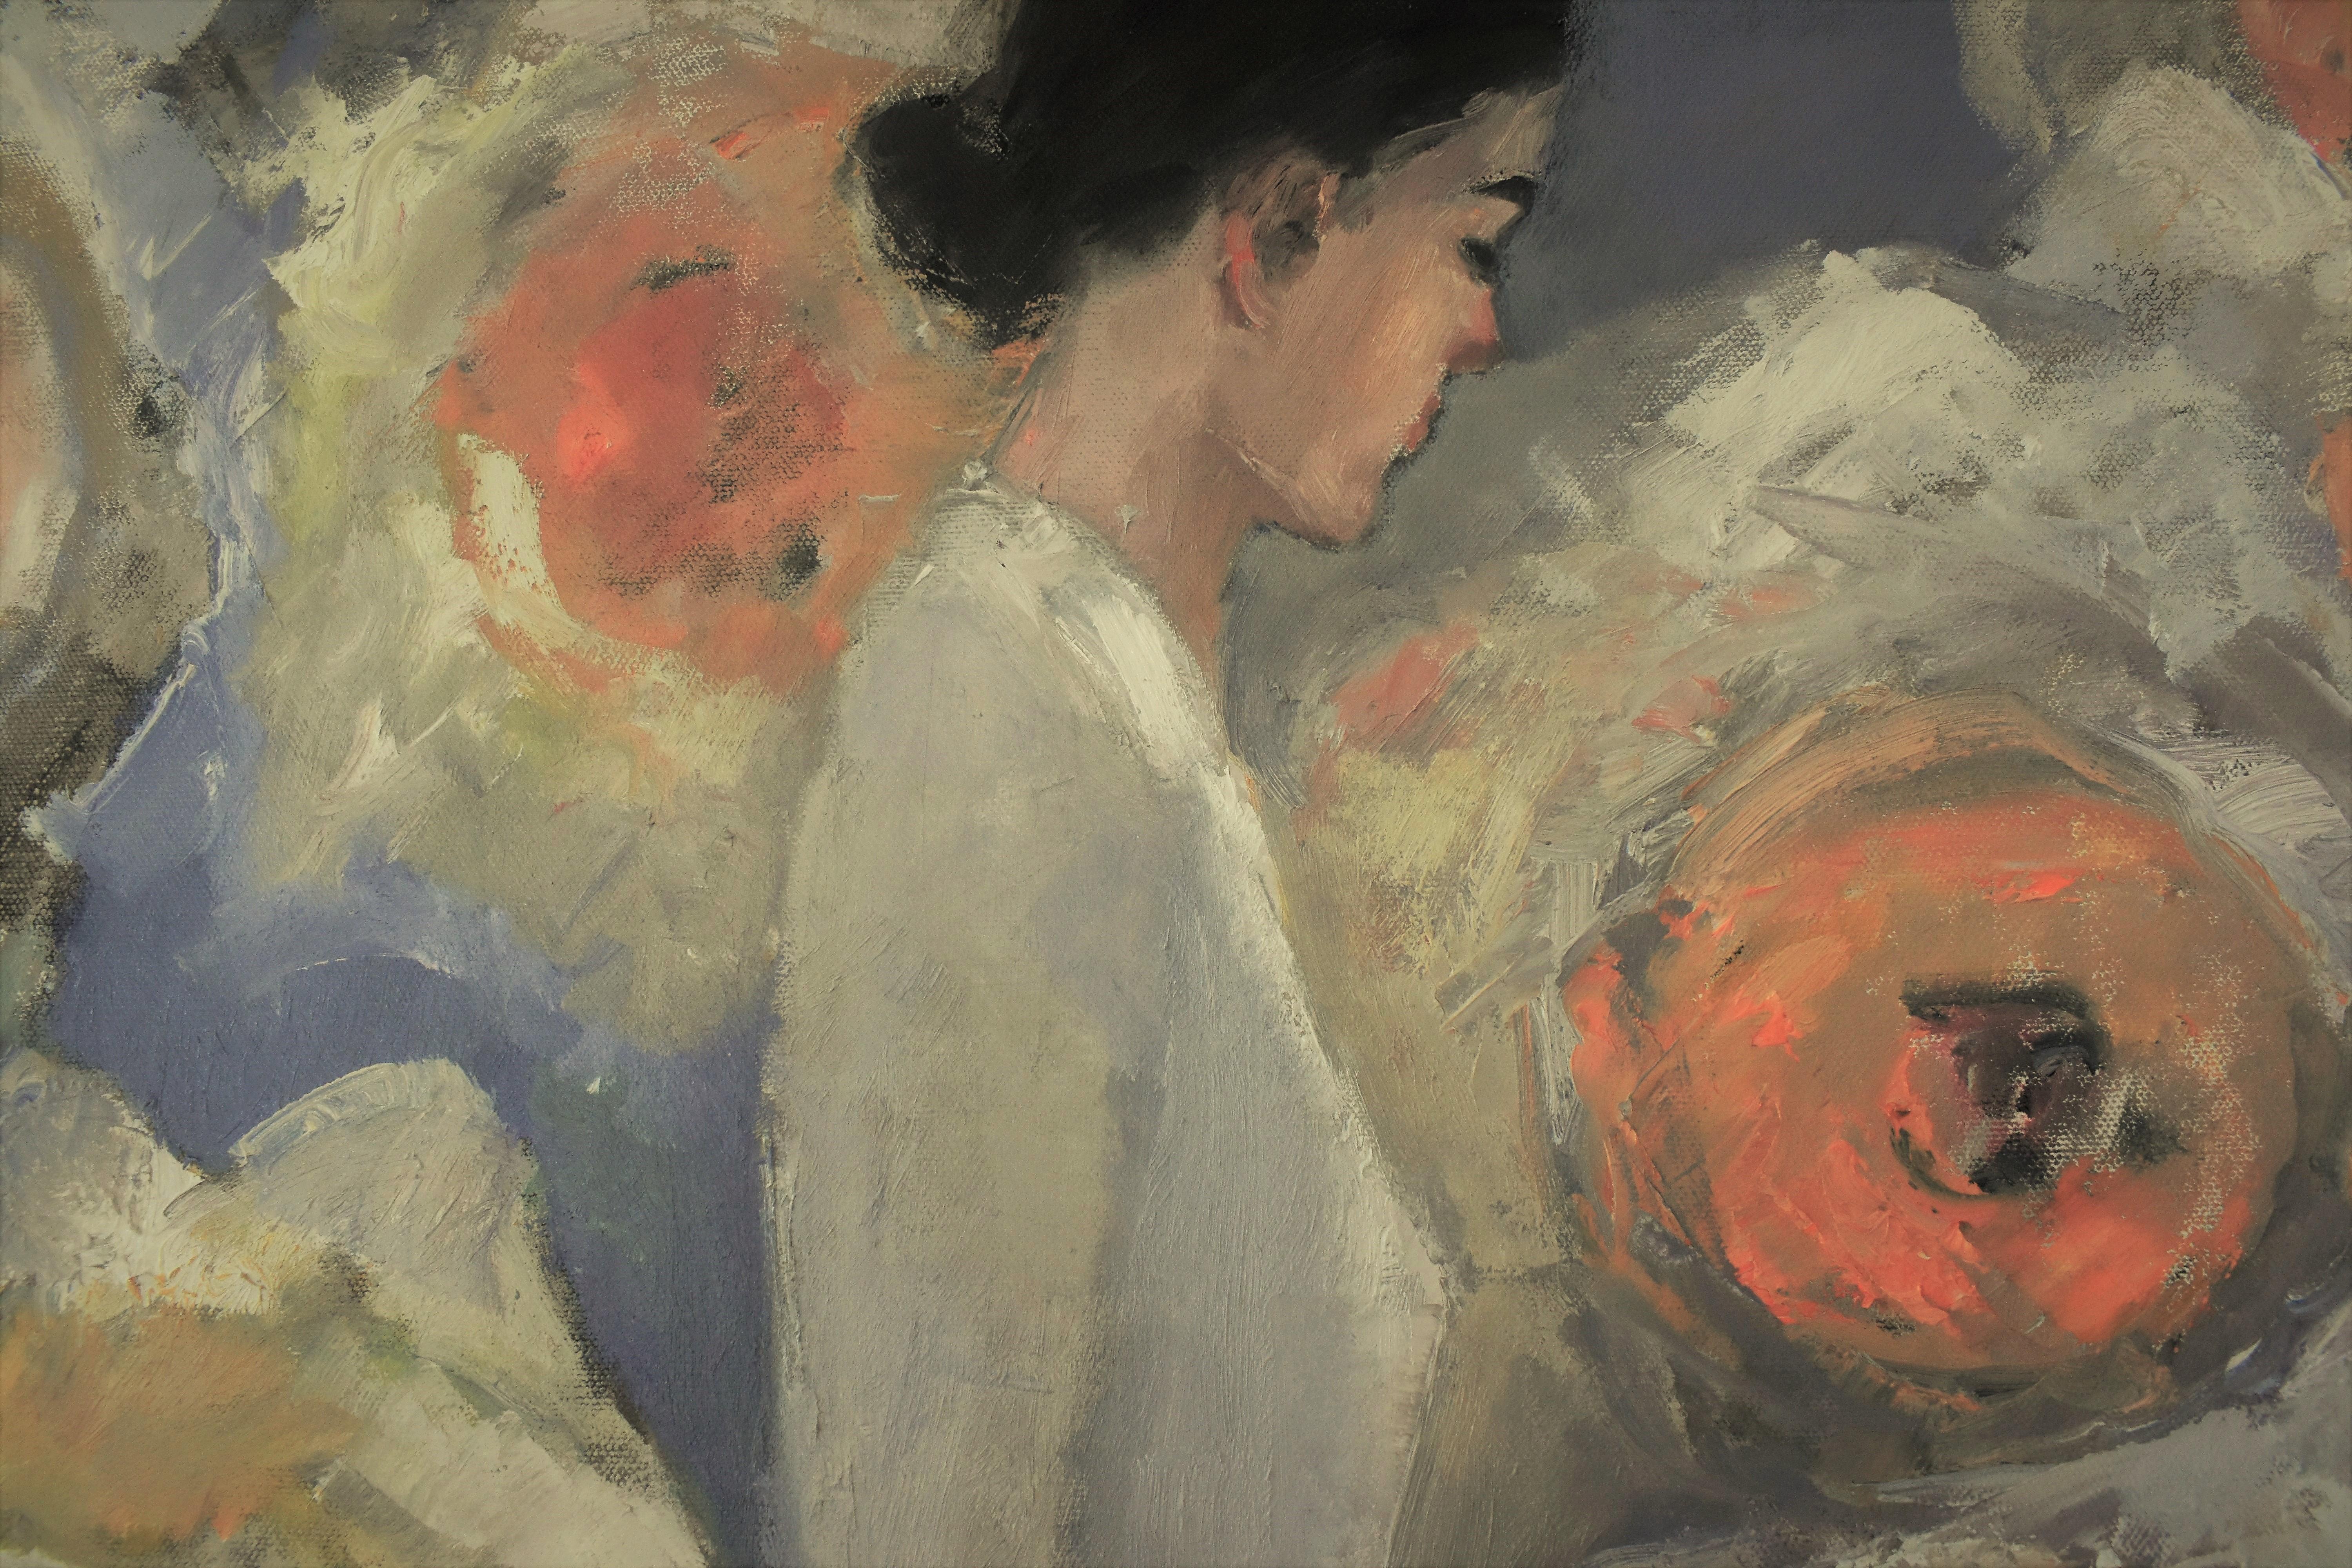 <p>Artist Comments<br />Elegantly dressed in a white floor-length gown, a woman serenely stands amidst large joyful blooms. Artist Mary Pratt chooses a soft palette in shades of orange and lilac. 